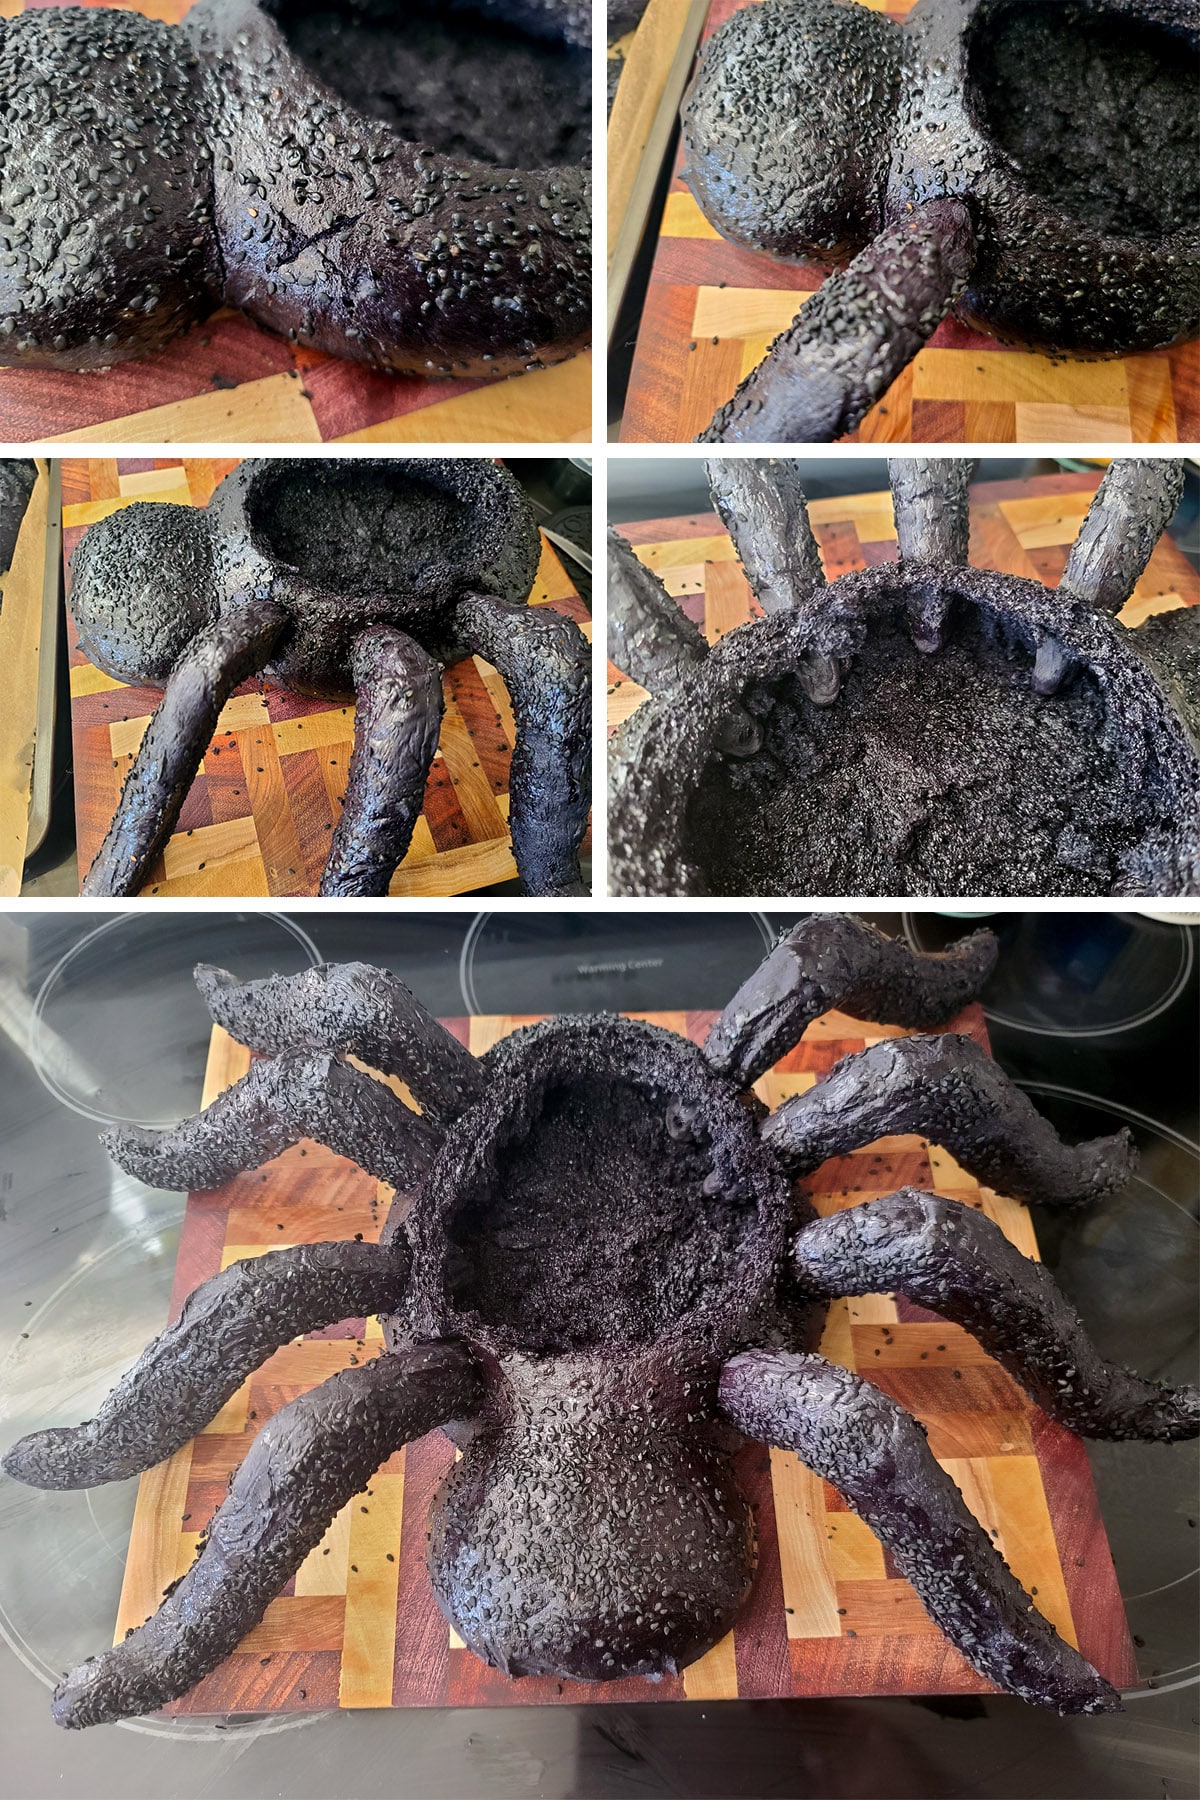 A 5 part image showing the legs being attached to the body of the spider bread bowl.